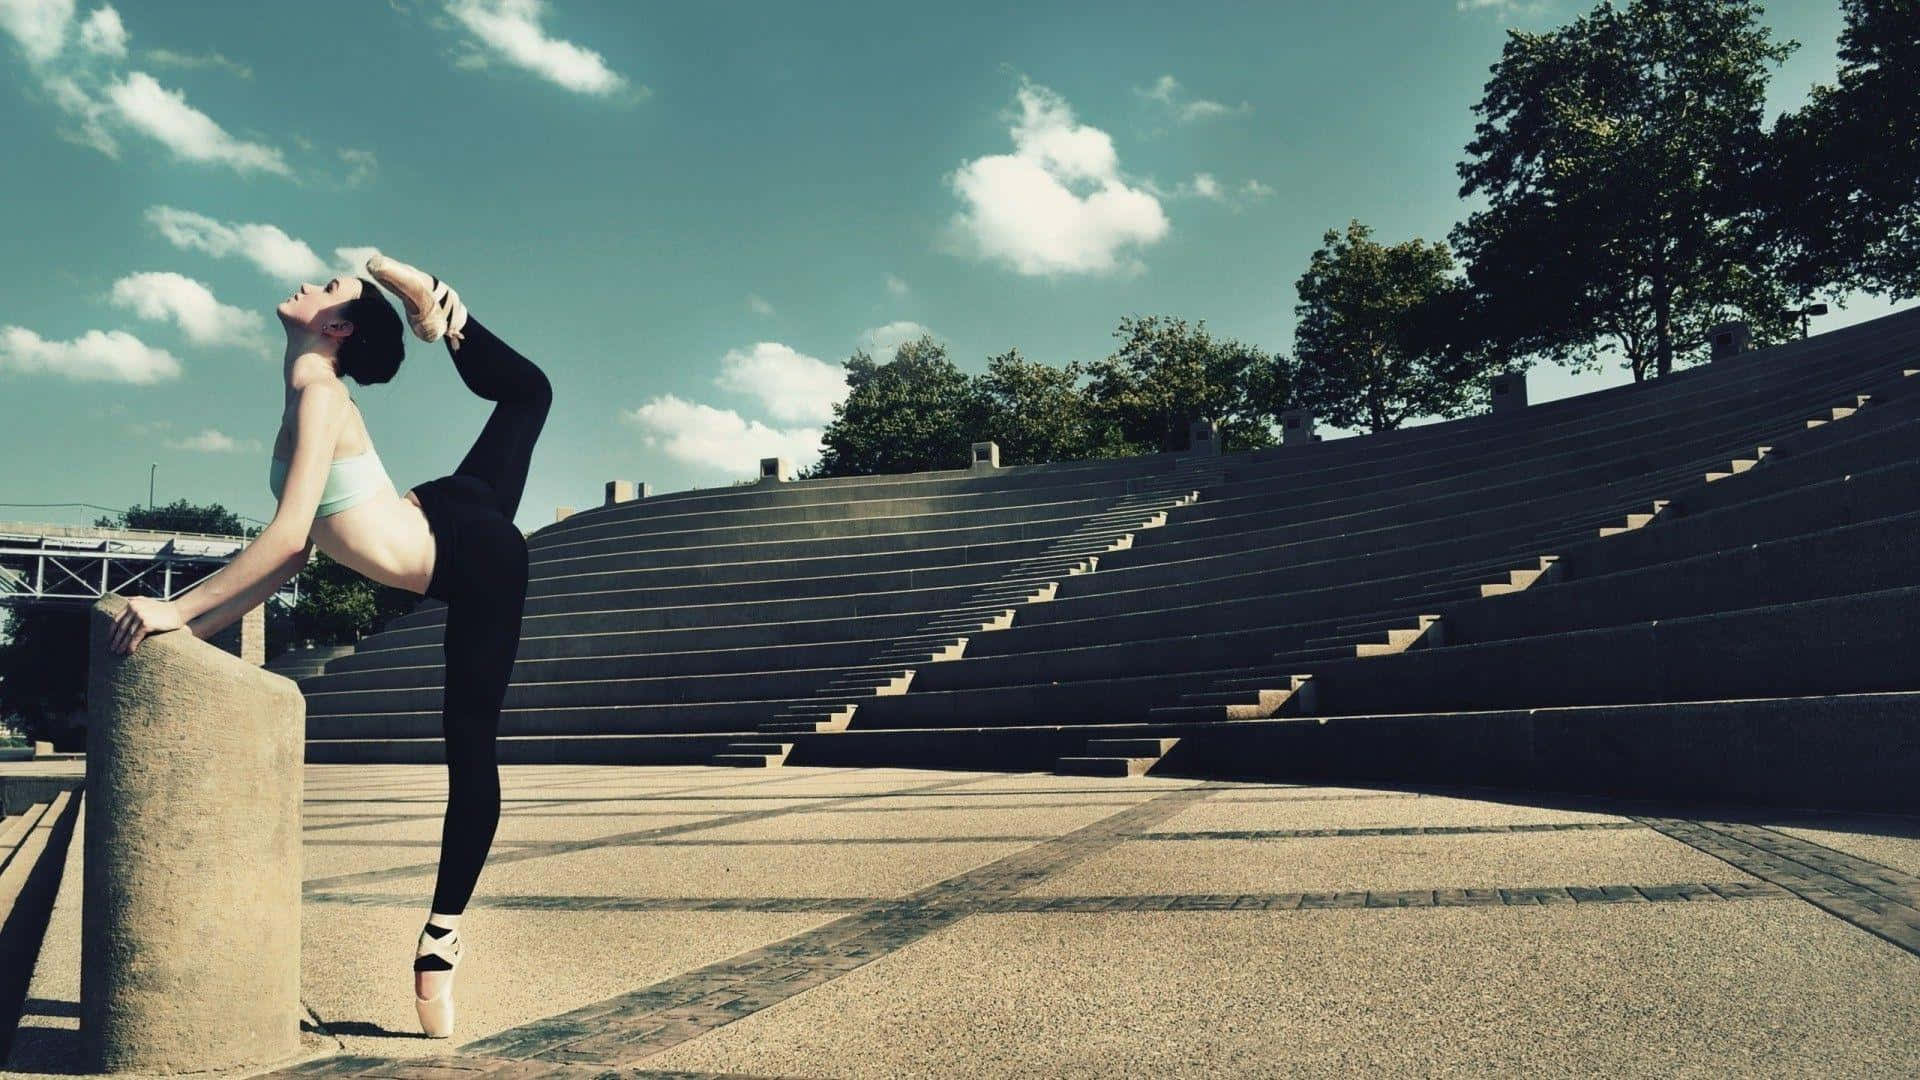 A Woman Is Doing A Ballet Pose On A Set Of Steps